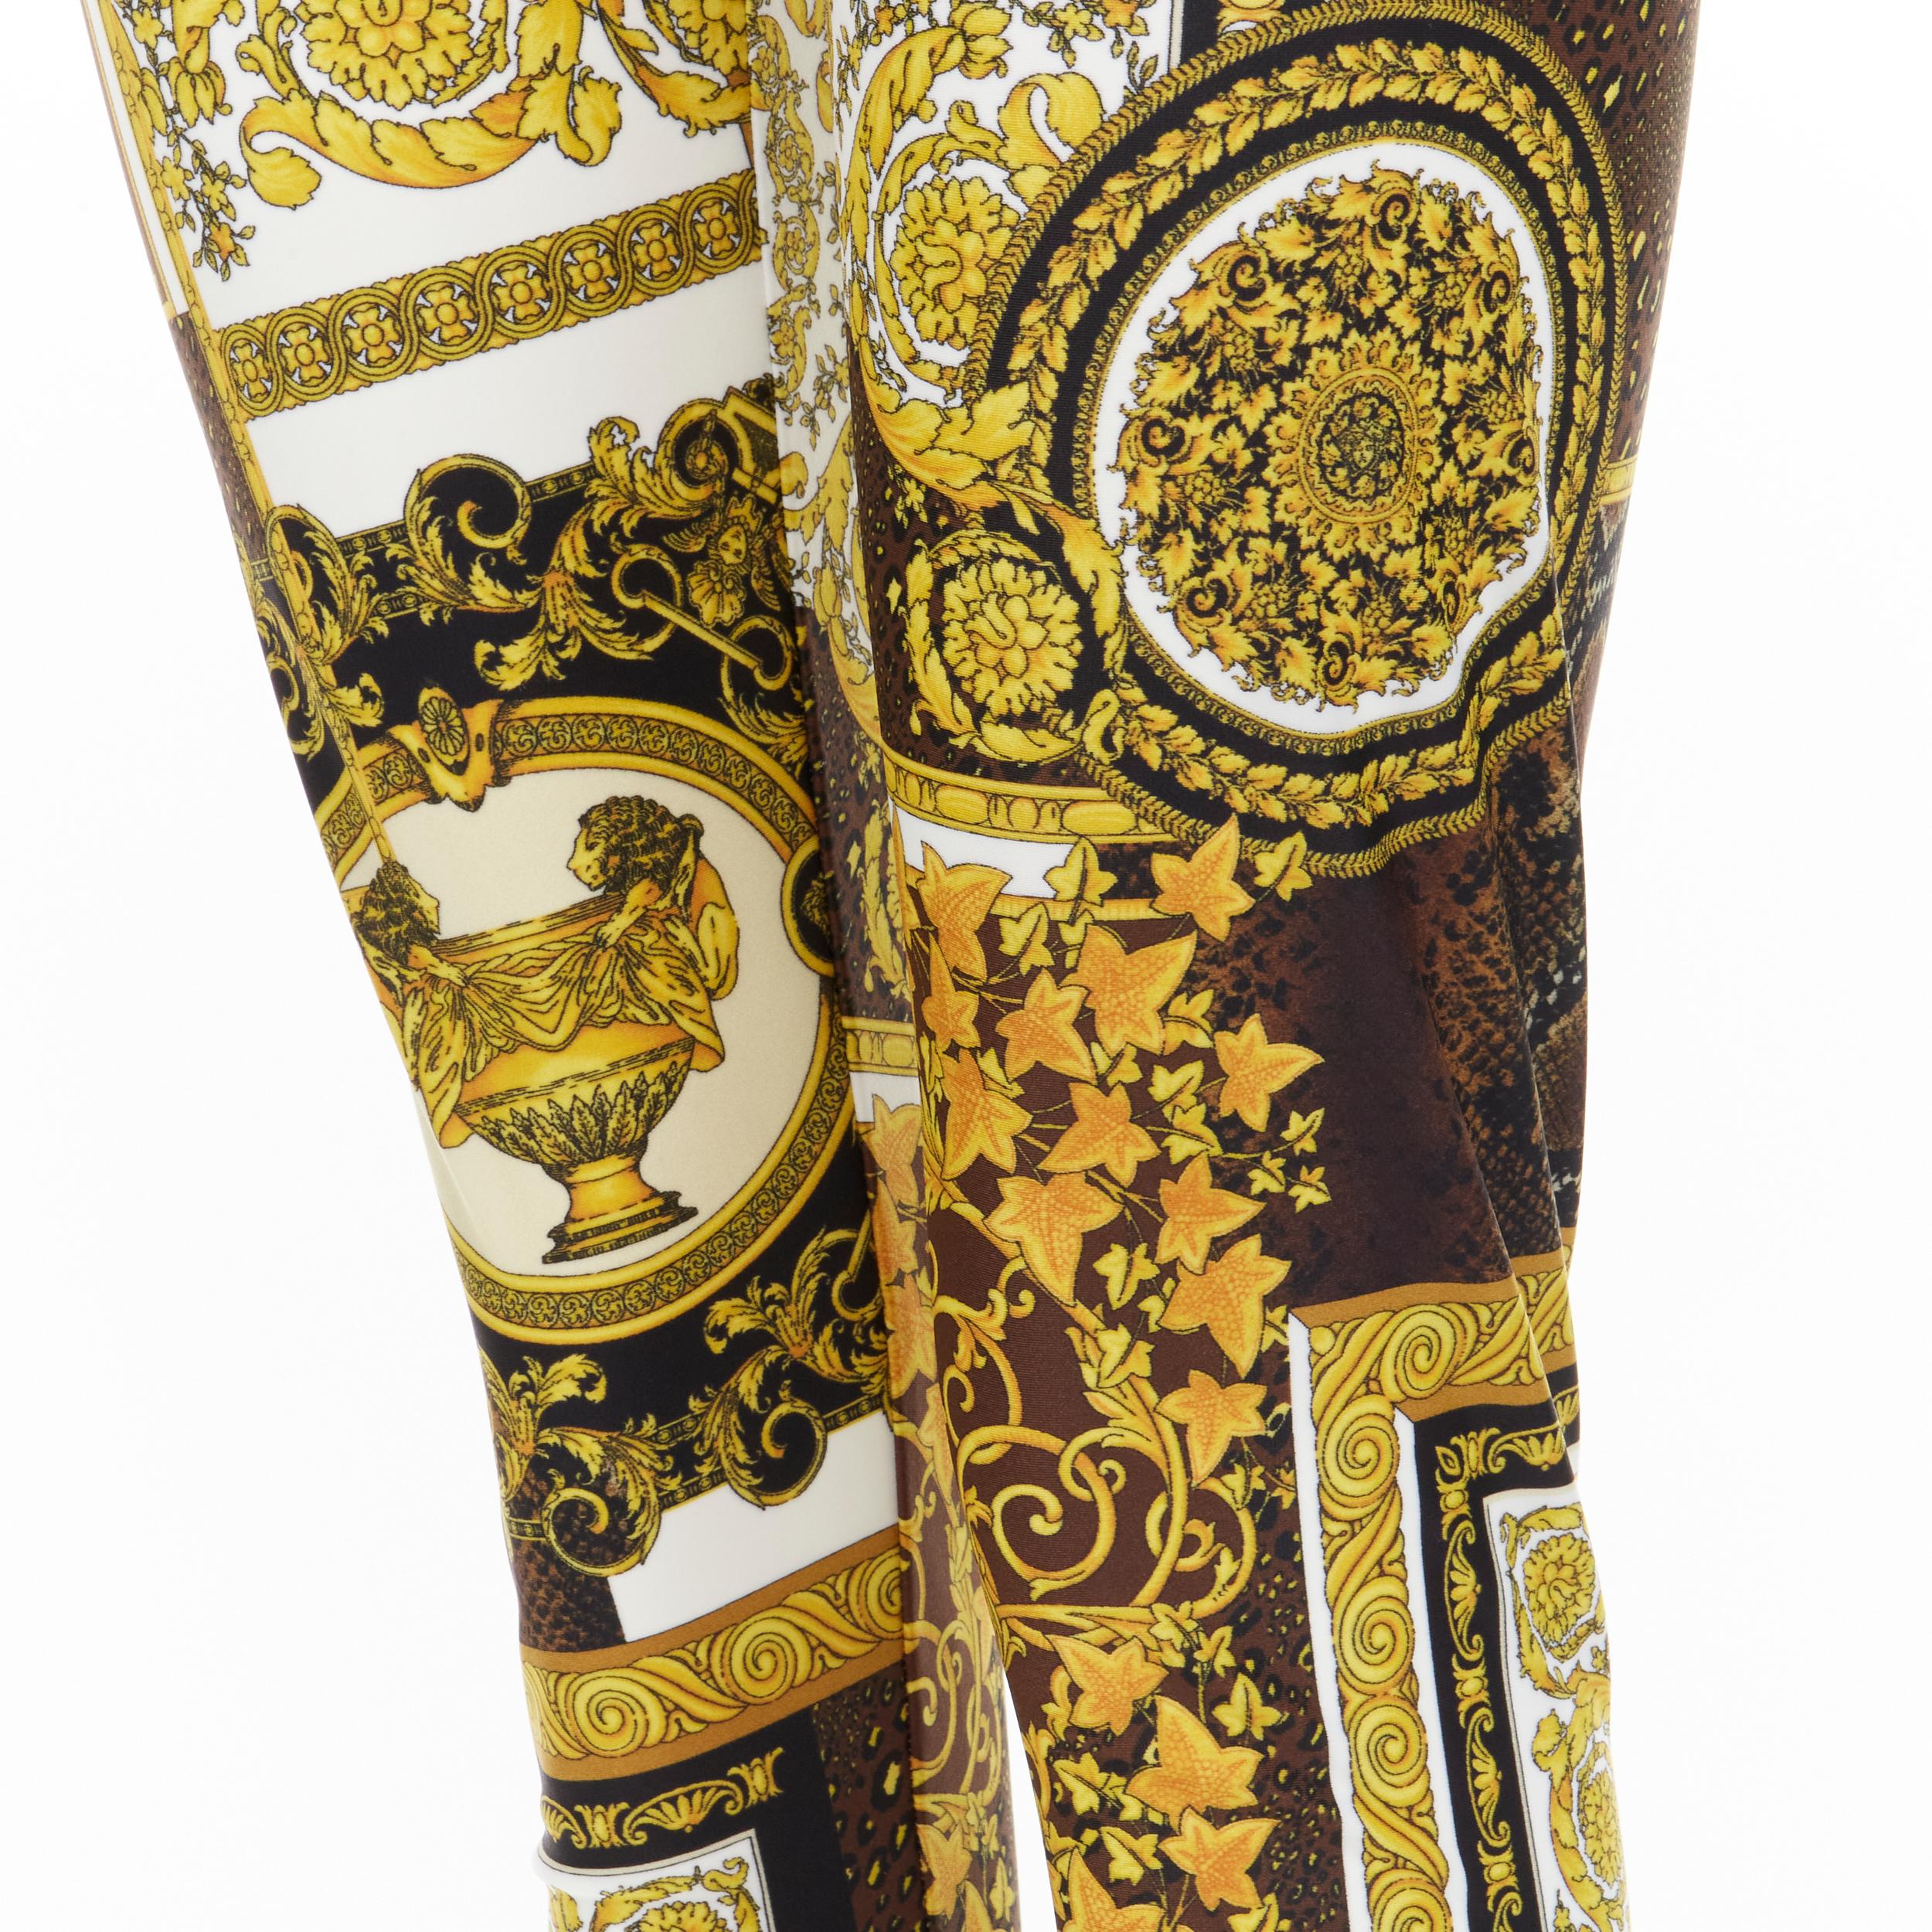 new VERSACE Mosaic Barocco black gold brown python stretchy leggings IT42 M 
Reference: TGAS/C00915 
Brand: Versace 
Designer: Donatella Versace 
Collection: Mosaic Barocco 
Material: Polyamide- 
Color: Gold 
Pattern: Floral 
Closure: Stretch 
Extra